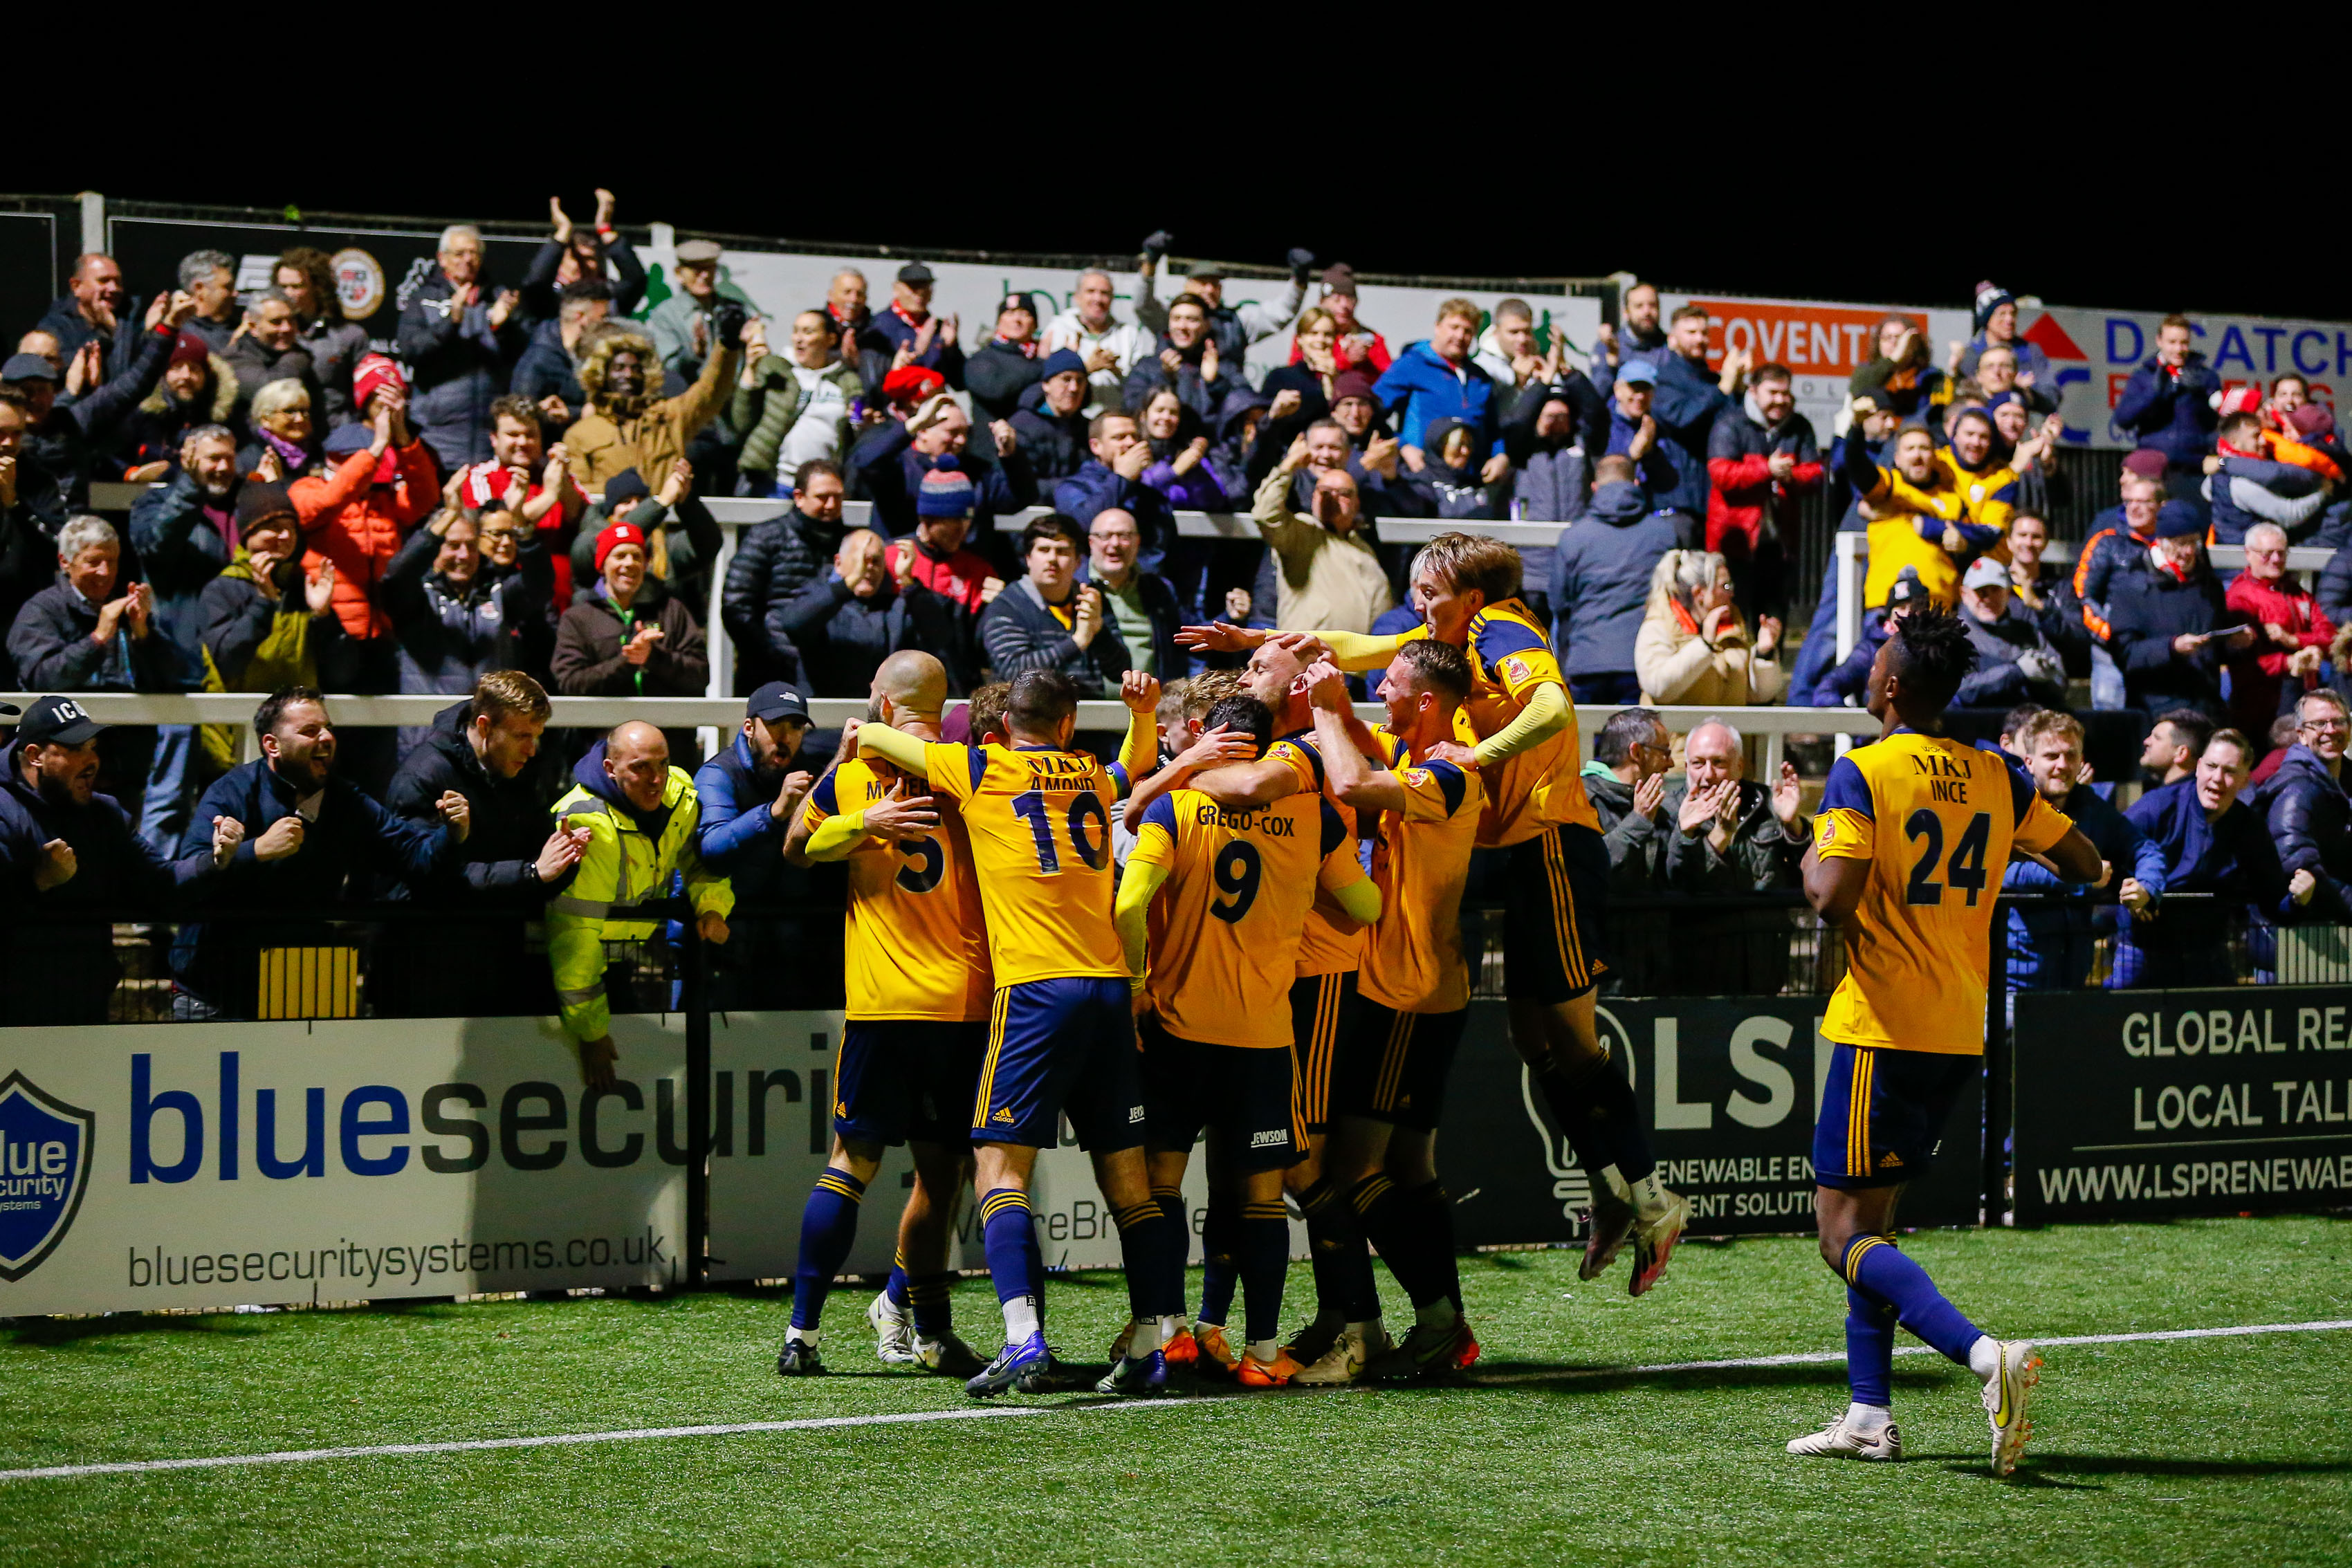 Celebrations after the second goal in the 2-0 win at Bromley